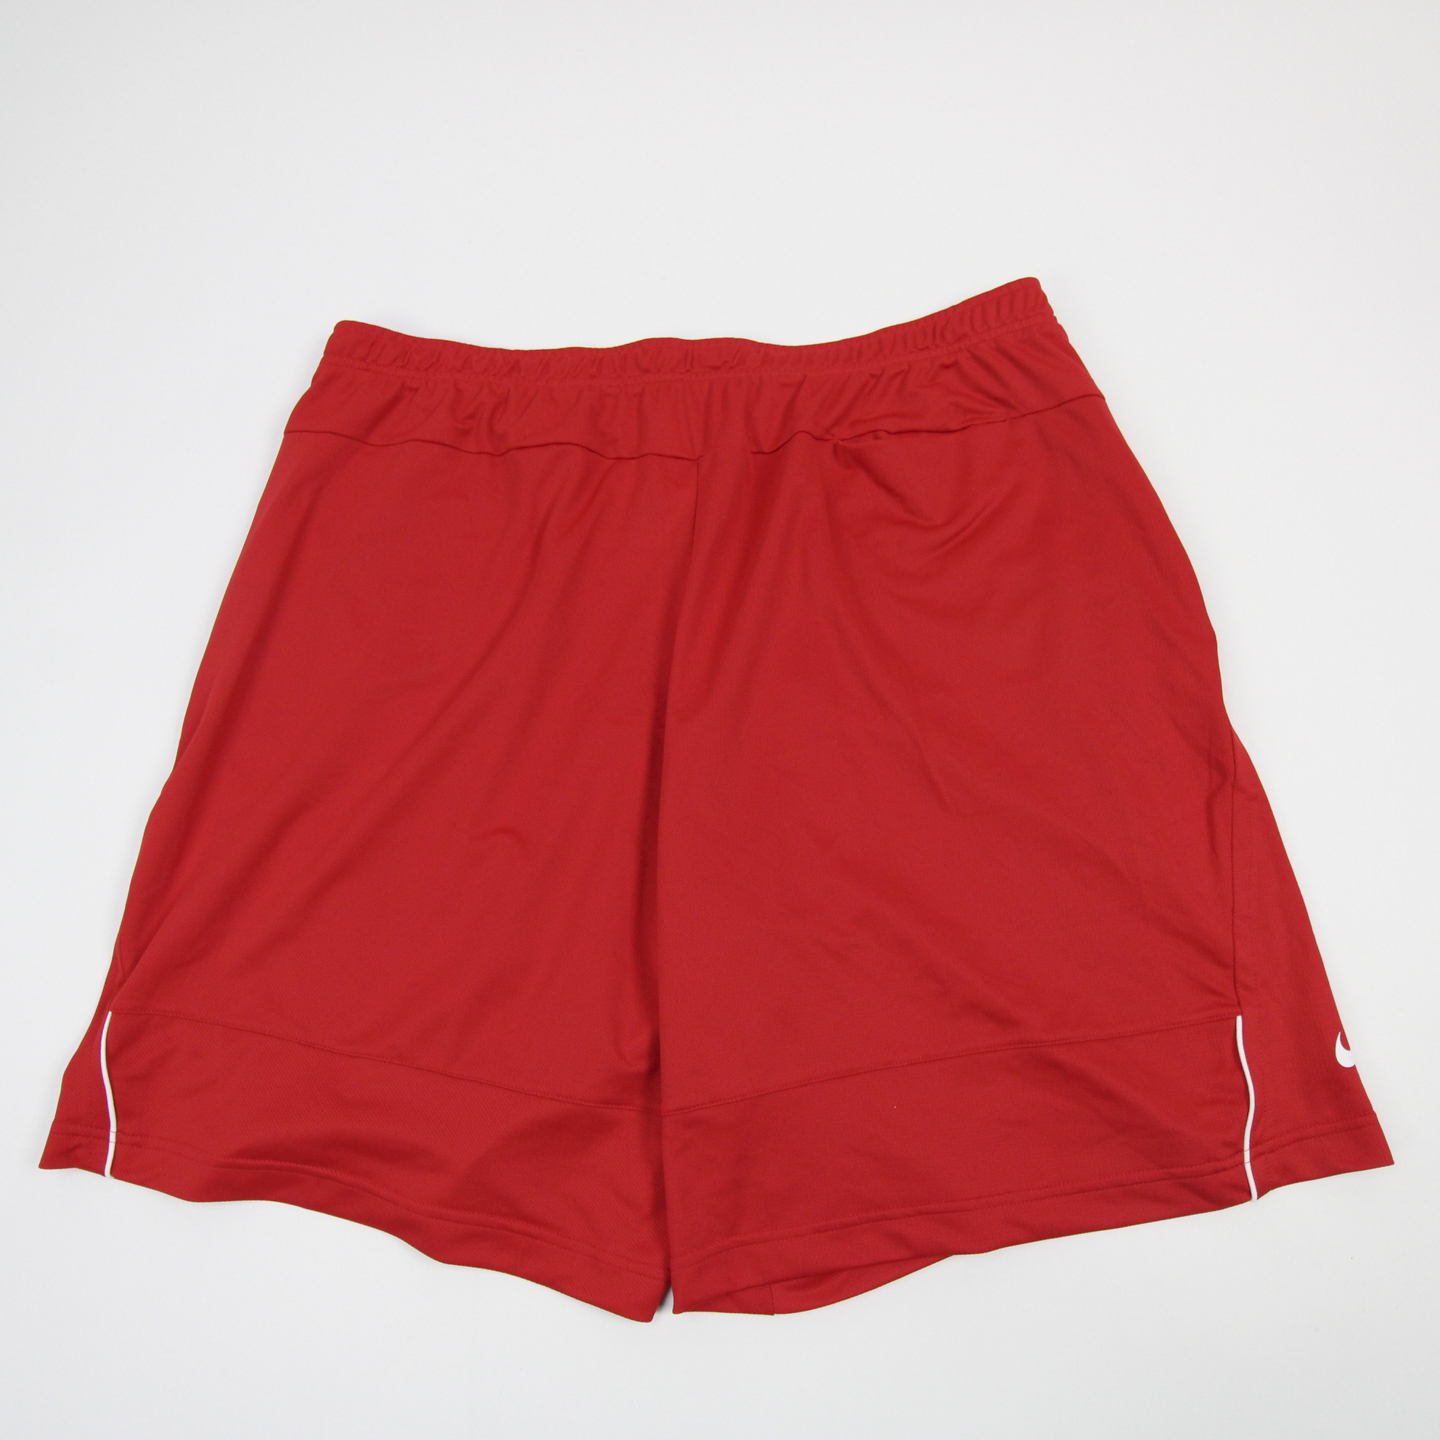 Dayton Flyers Nike Dri-Fit Athletic Shorts Men's Red New with Tags | eBay